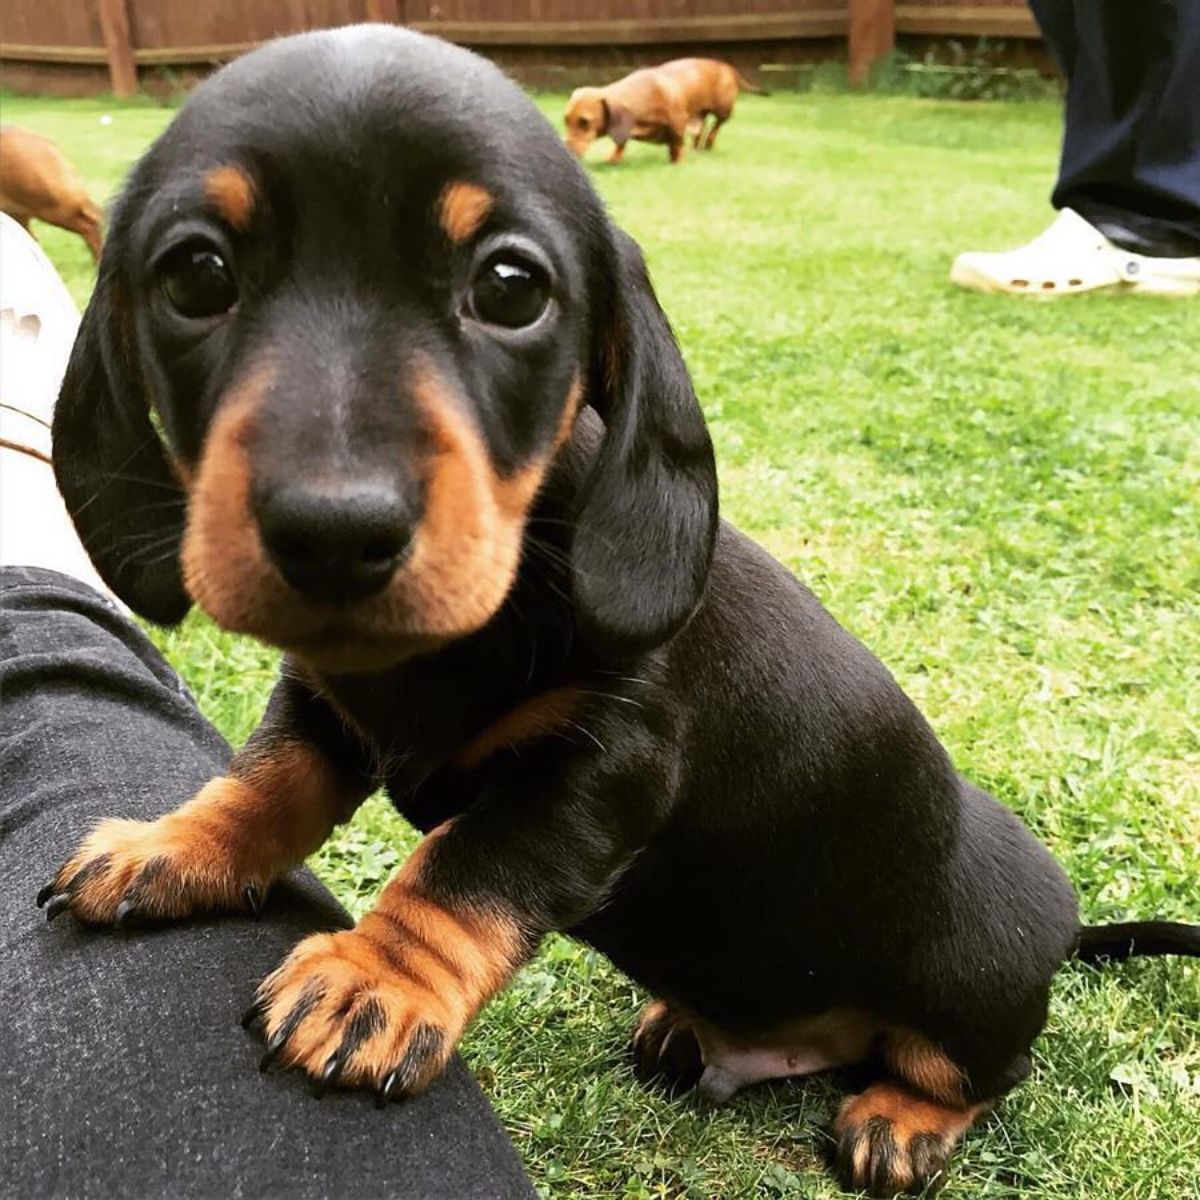 black and brown dachshund puppy sitting on grass with two front paws on someone's leg